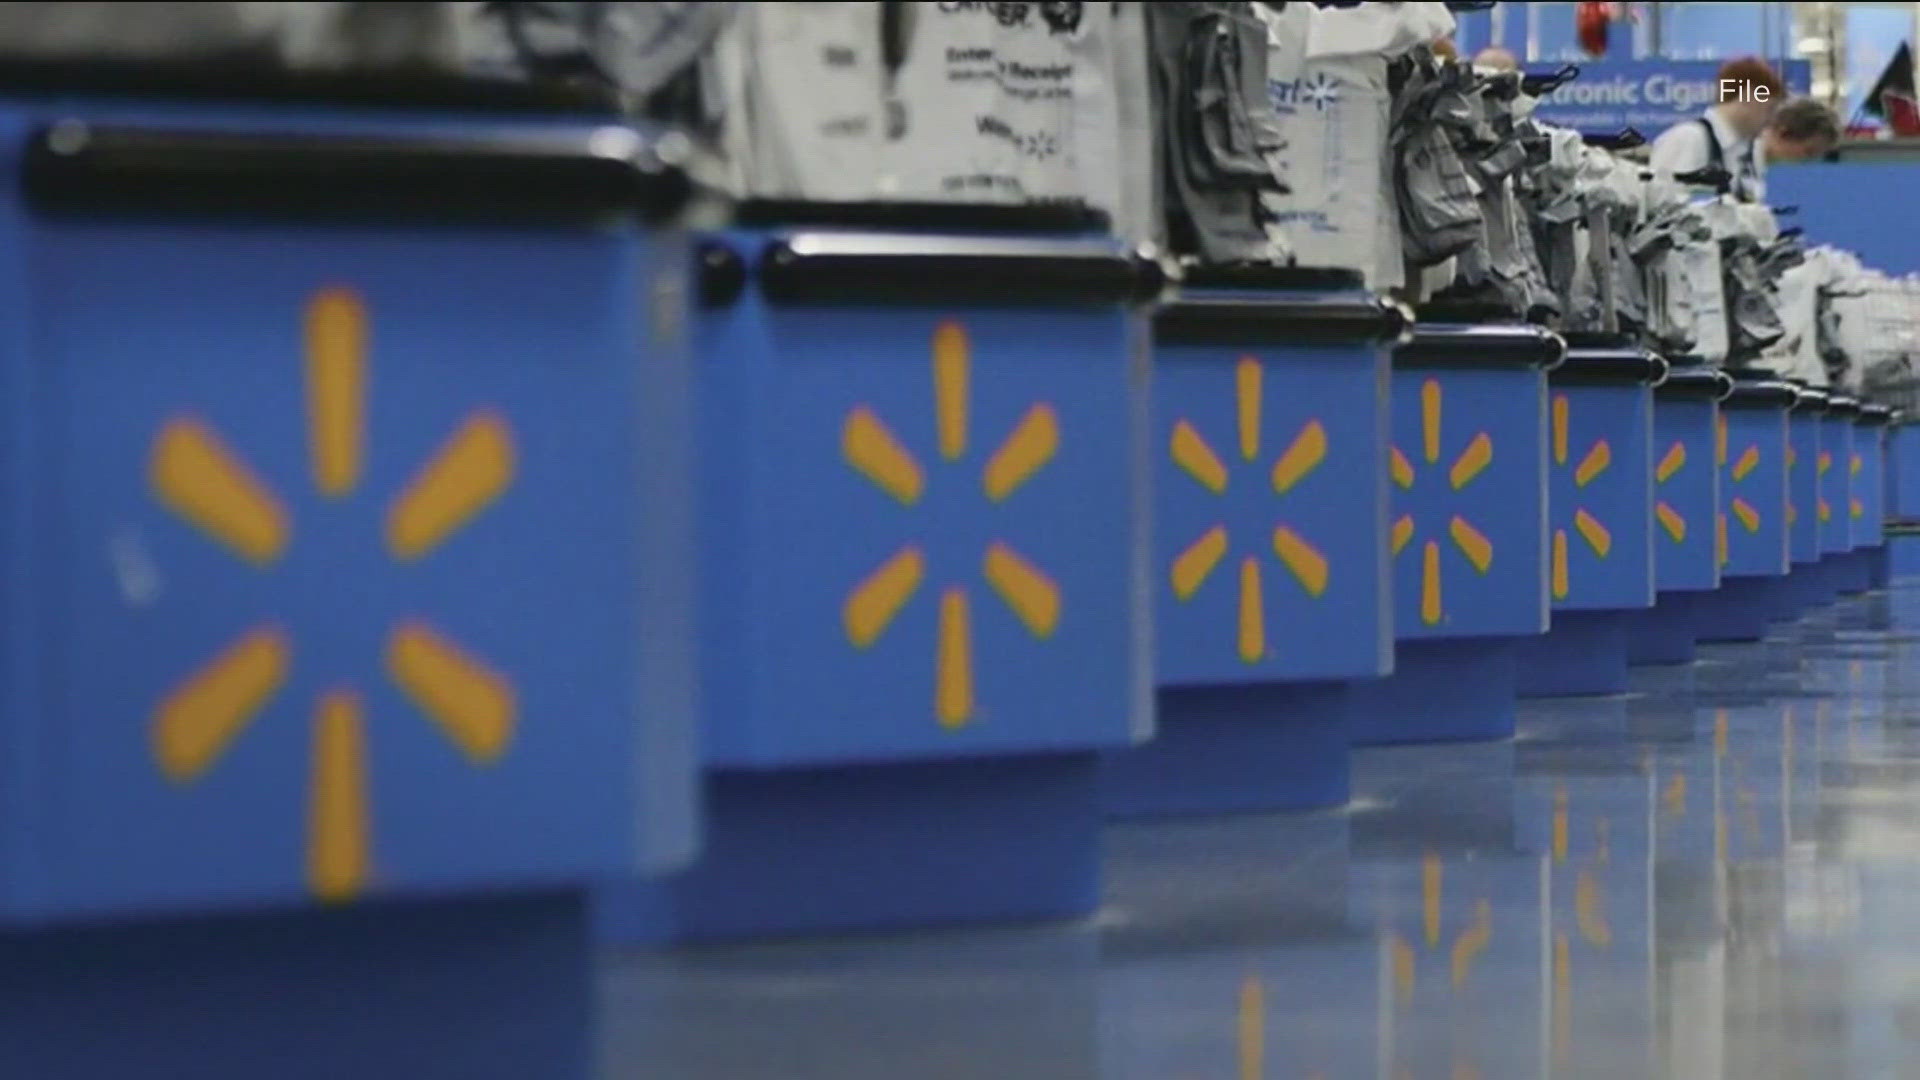 Walmart celebrated it's 54th annual shareholders meeting this week.